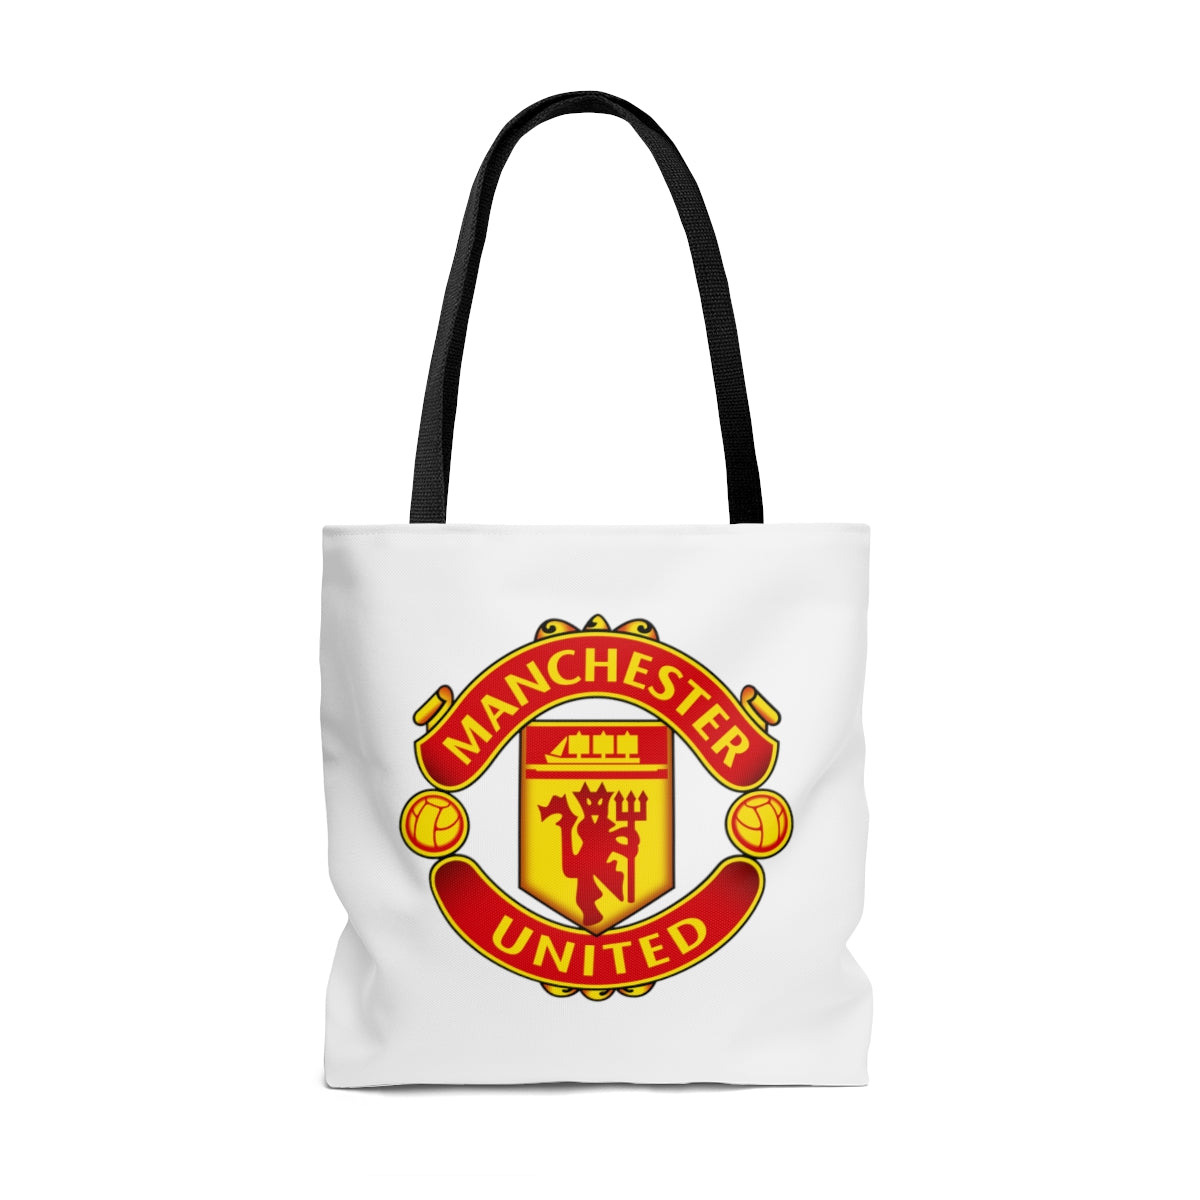 Manchester United Tote Bag